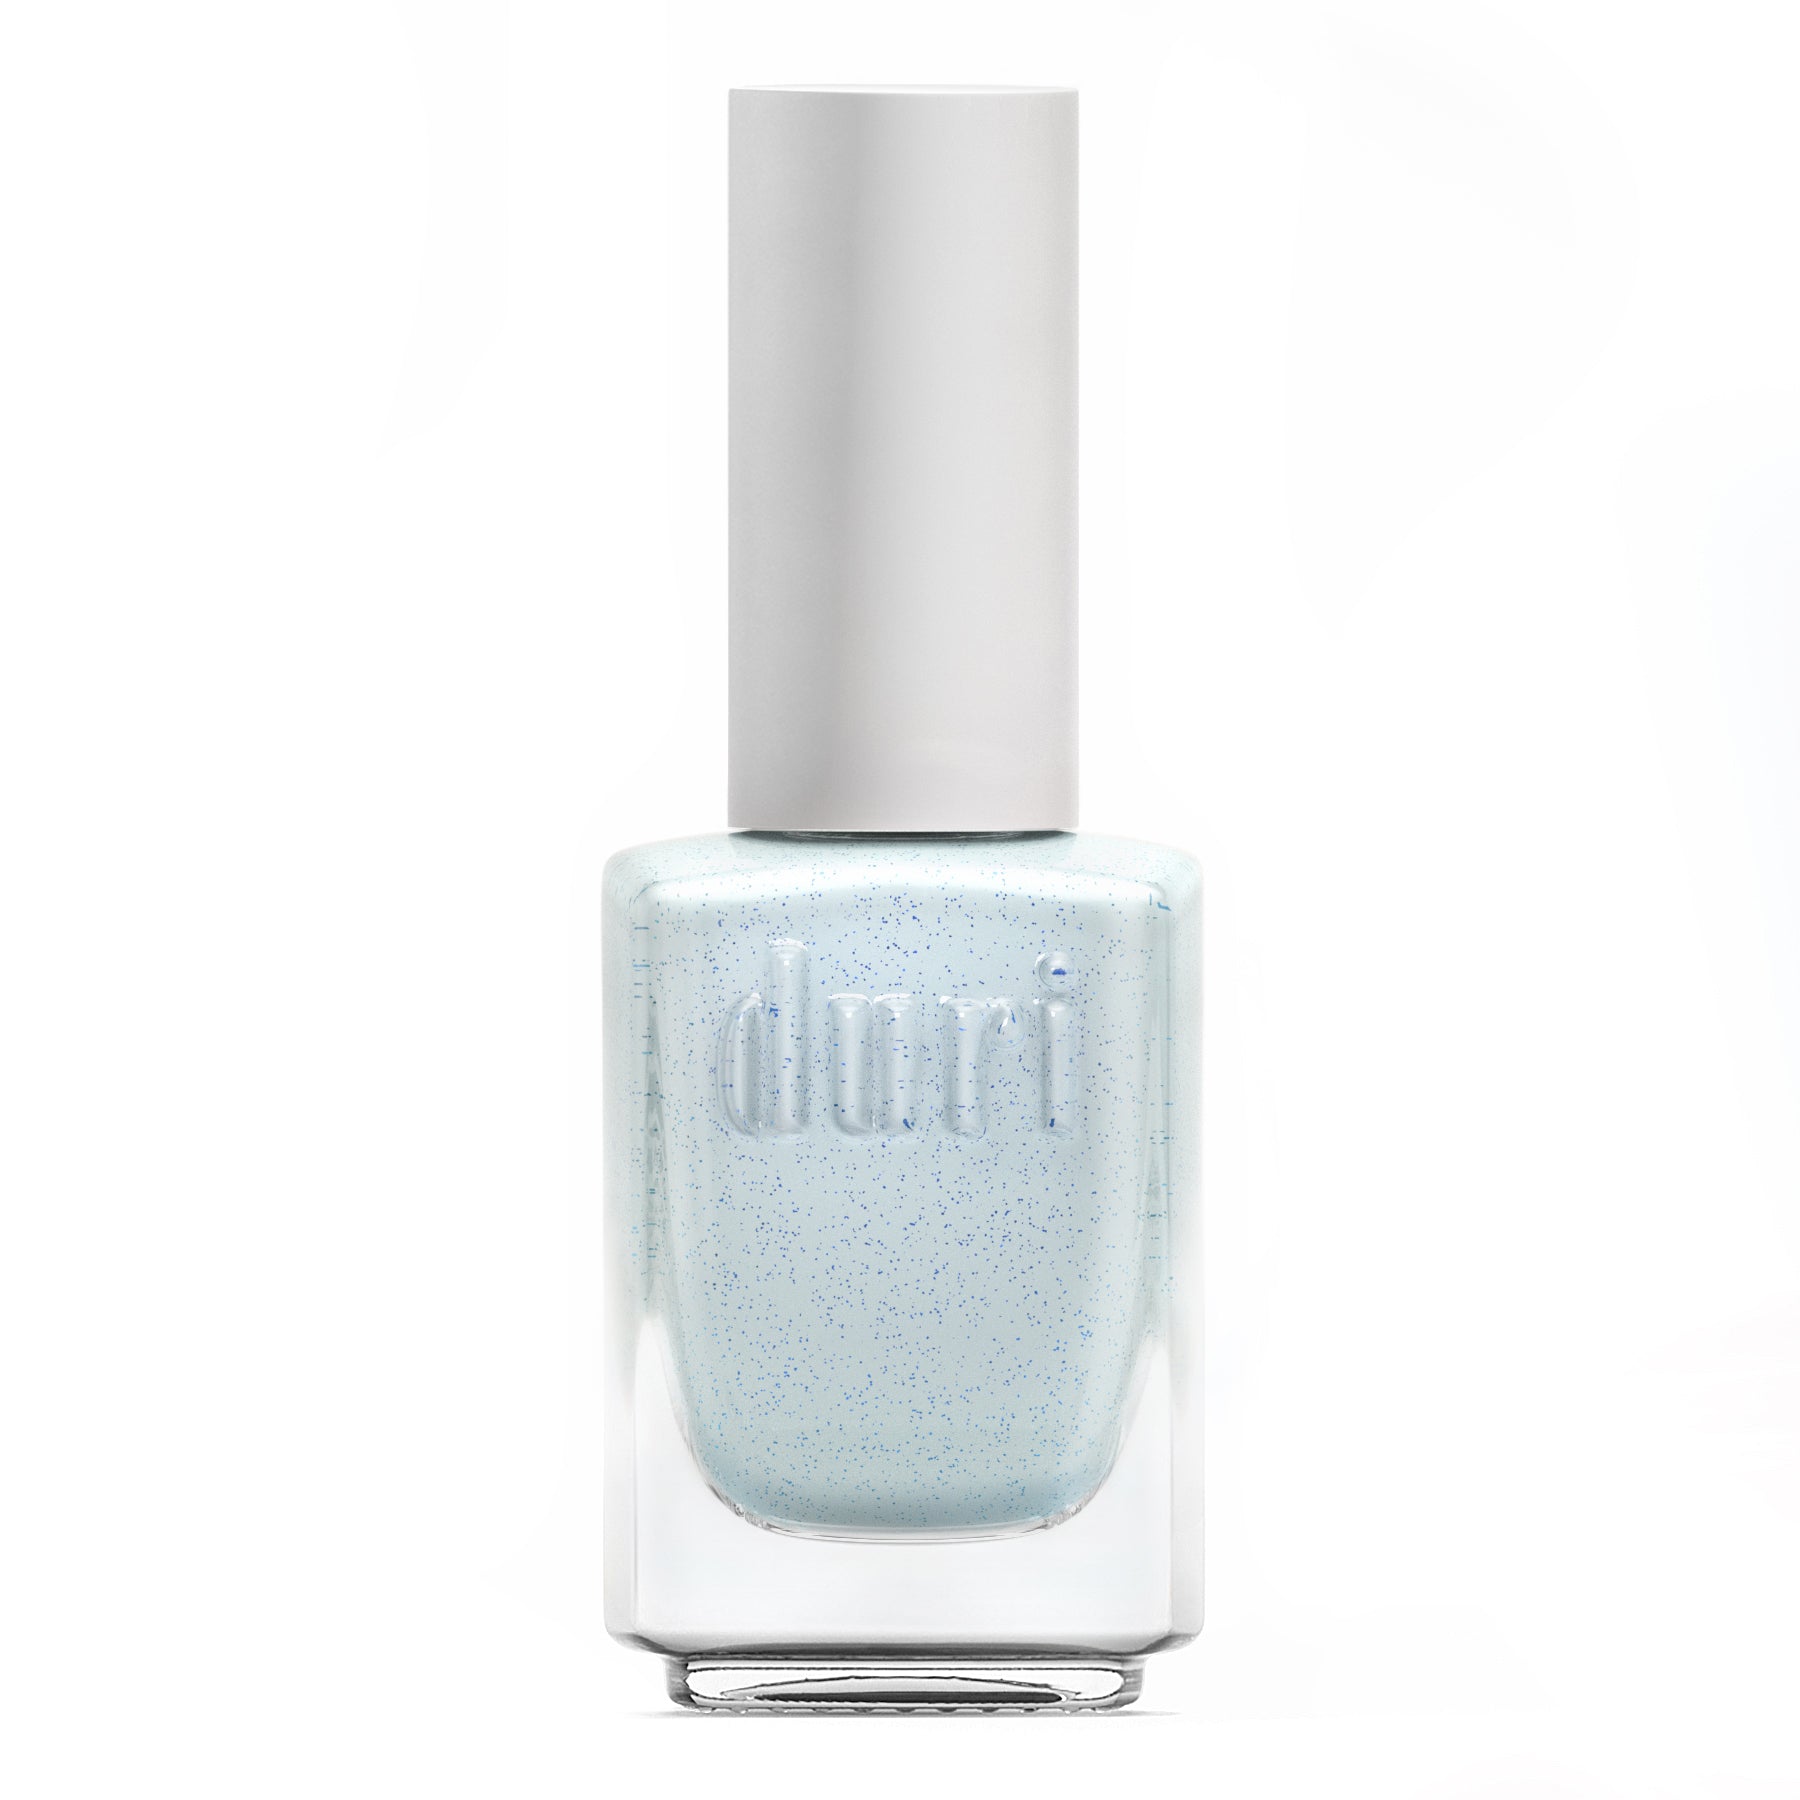 Cloud Nine Baby Blue Sheer Jelly Nail Polish Vegan Just Jellies Collection  - Etsy